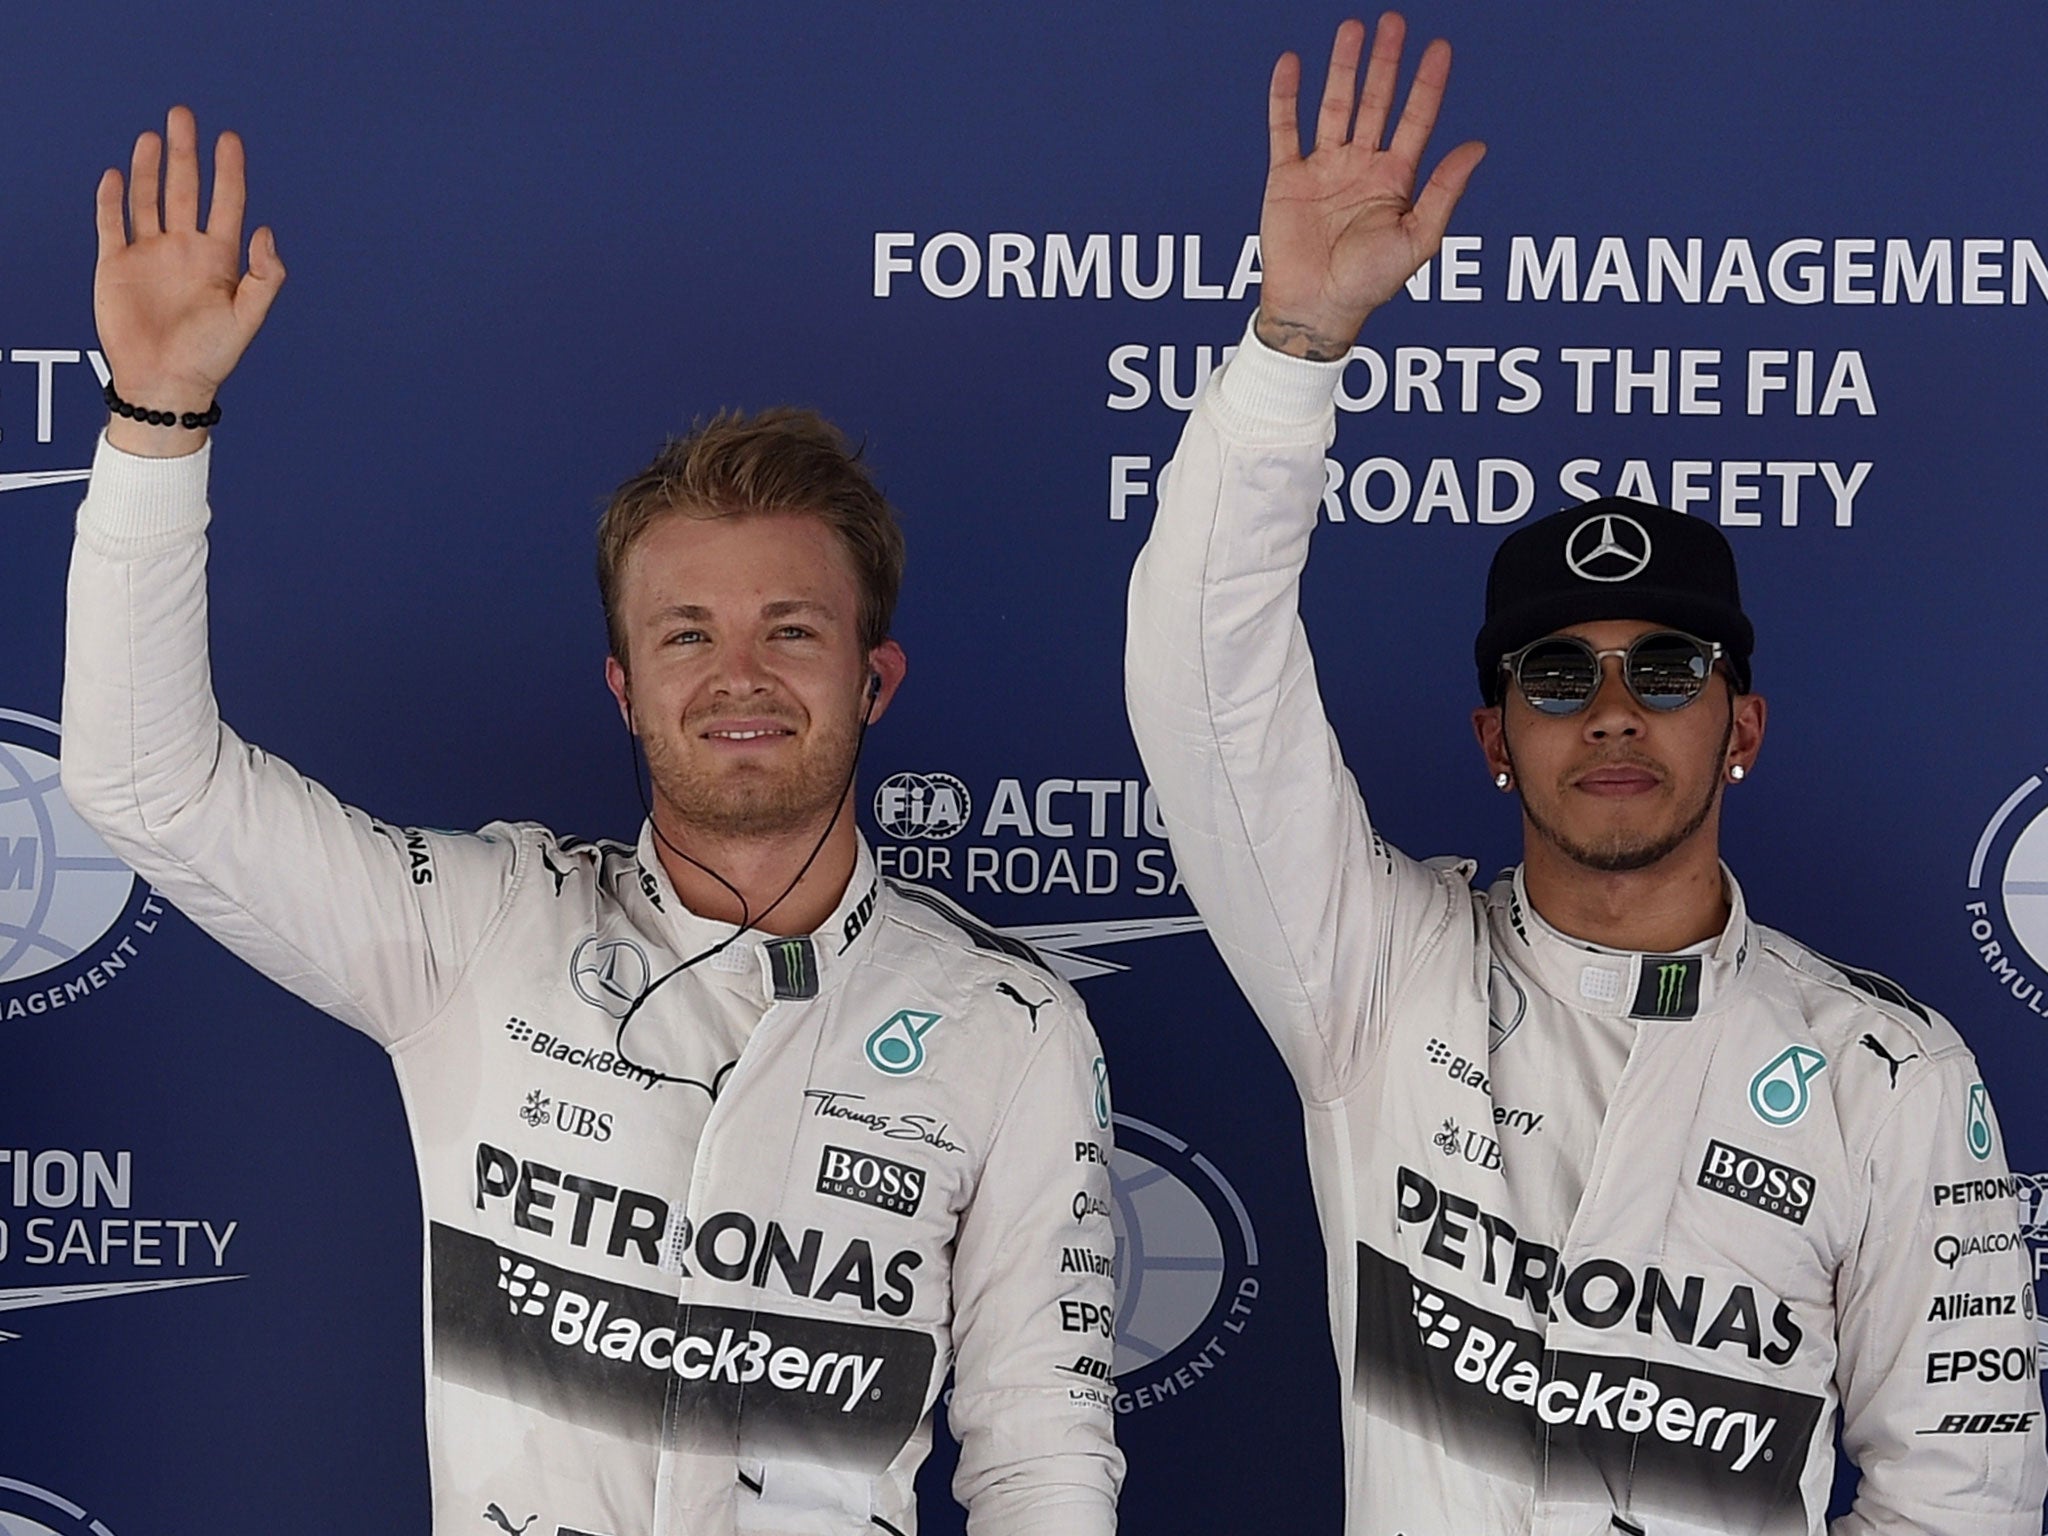 Nico Rosberg beat Lewis Hamilton by over two-tenths of a second